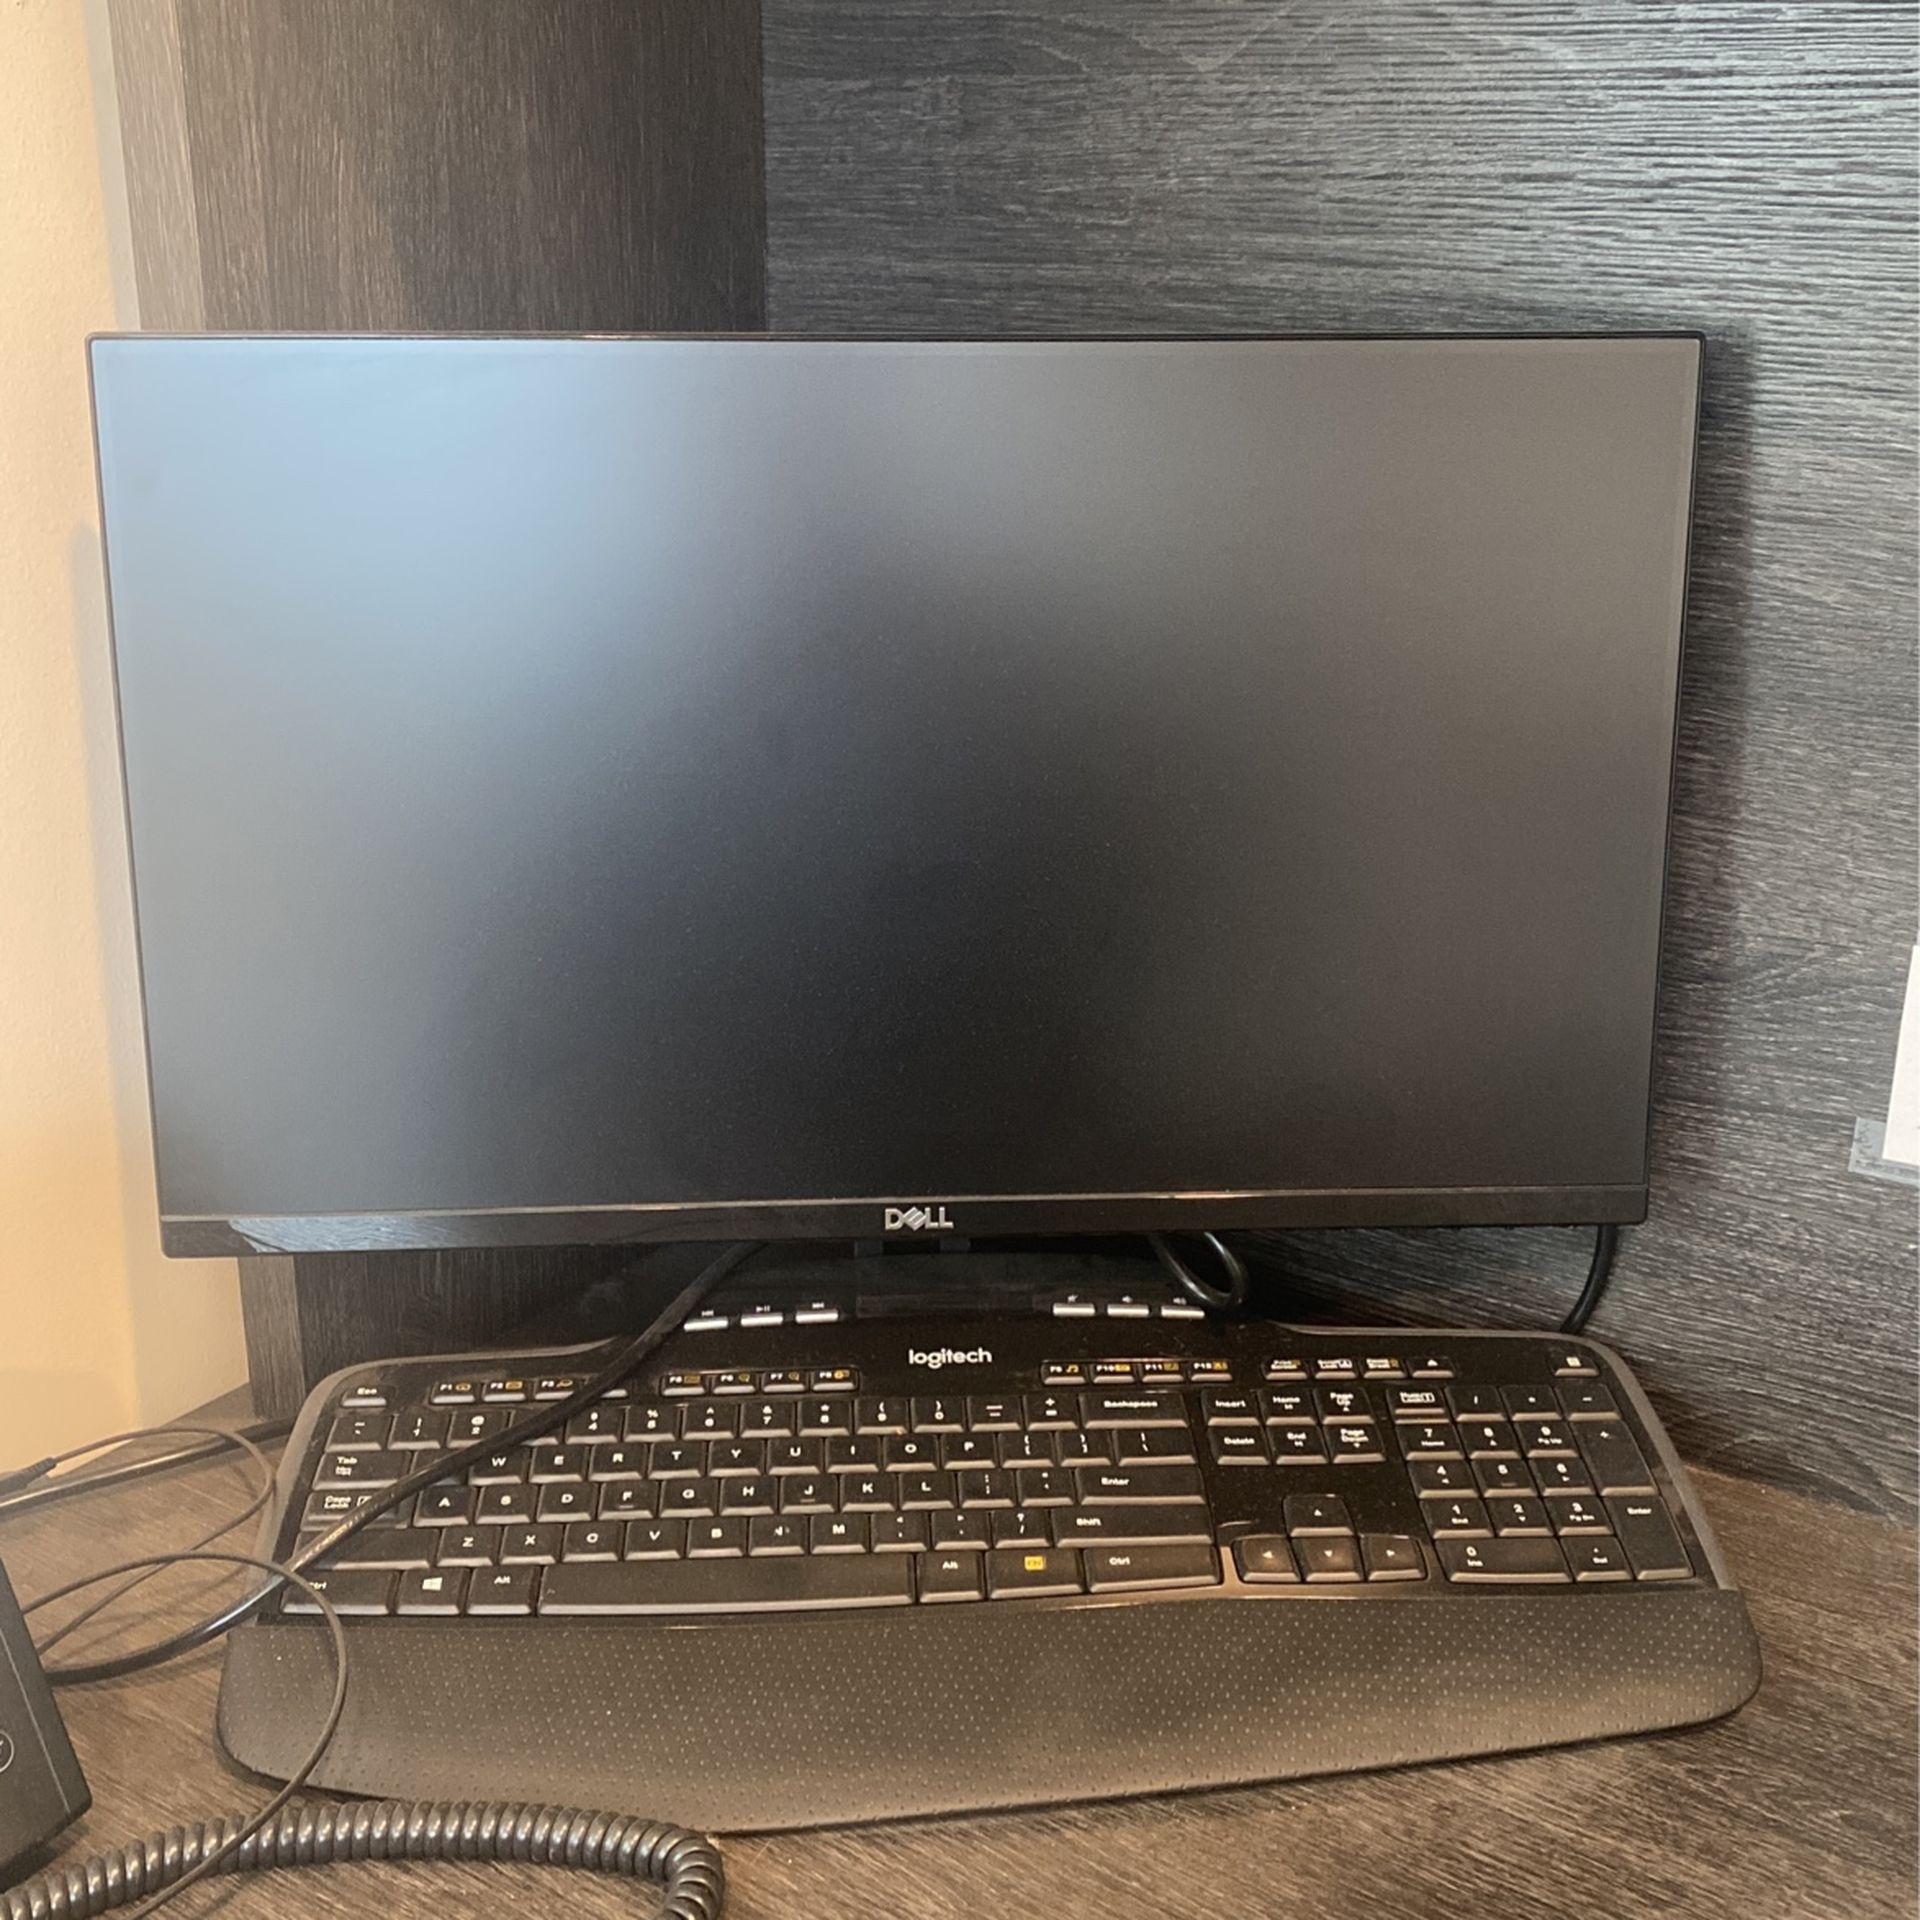 Dell Monitor And Logitech Keyboard